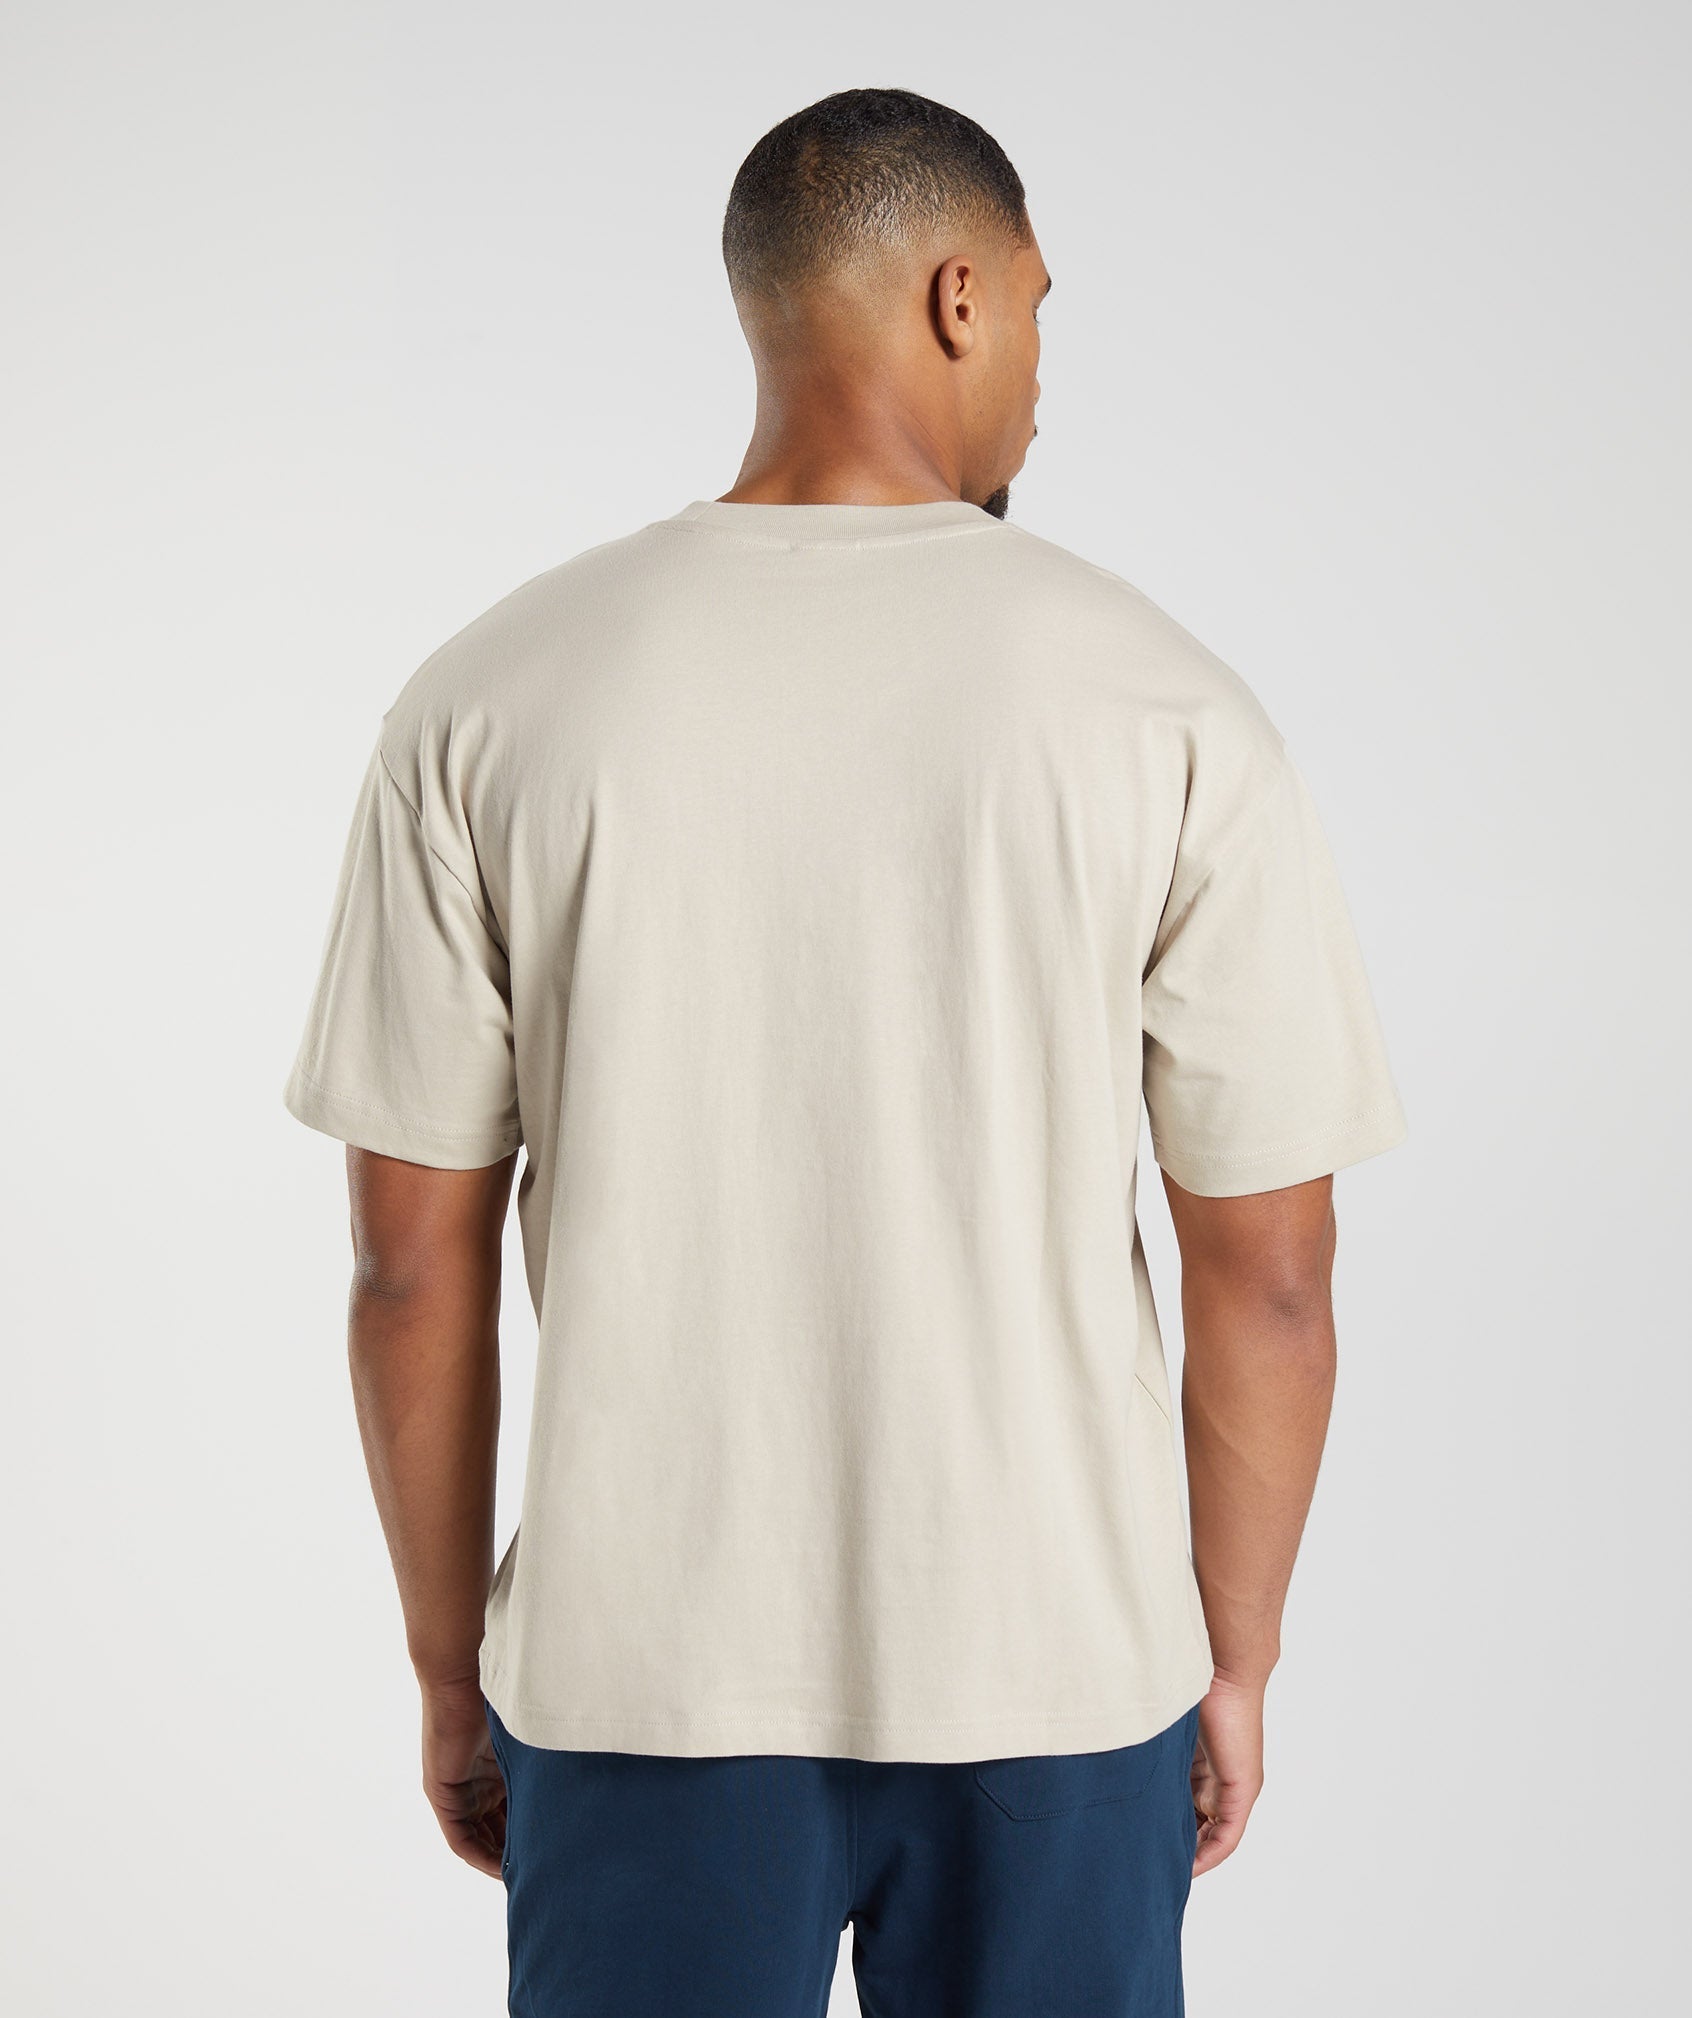 Rest Day Sweats T-Shirt in Pebble Grey - view 3